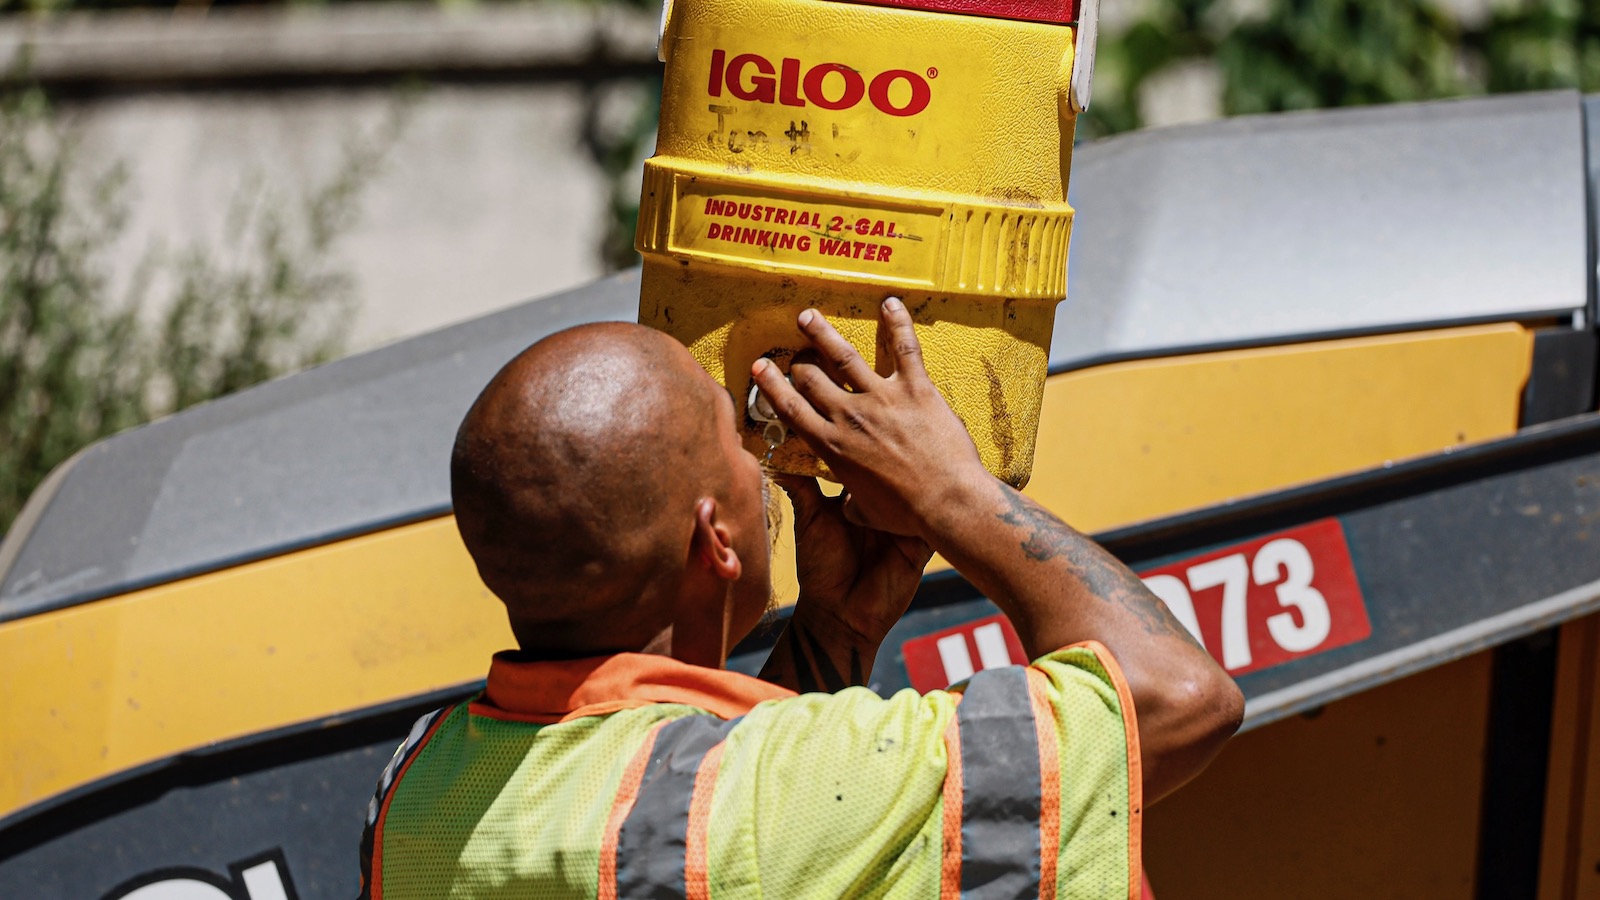 A construction worker in Los Angeles takes a break from repaving a road to drink directly from a water cooler as temperatures top 100 degrees.